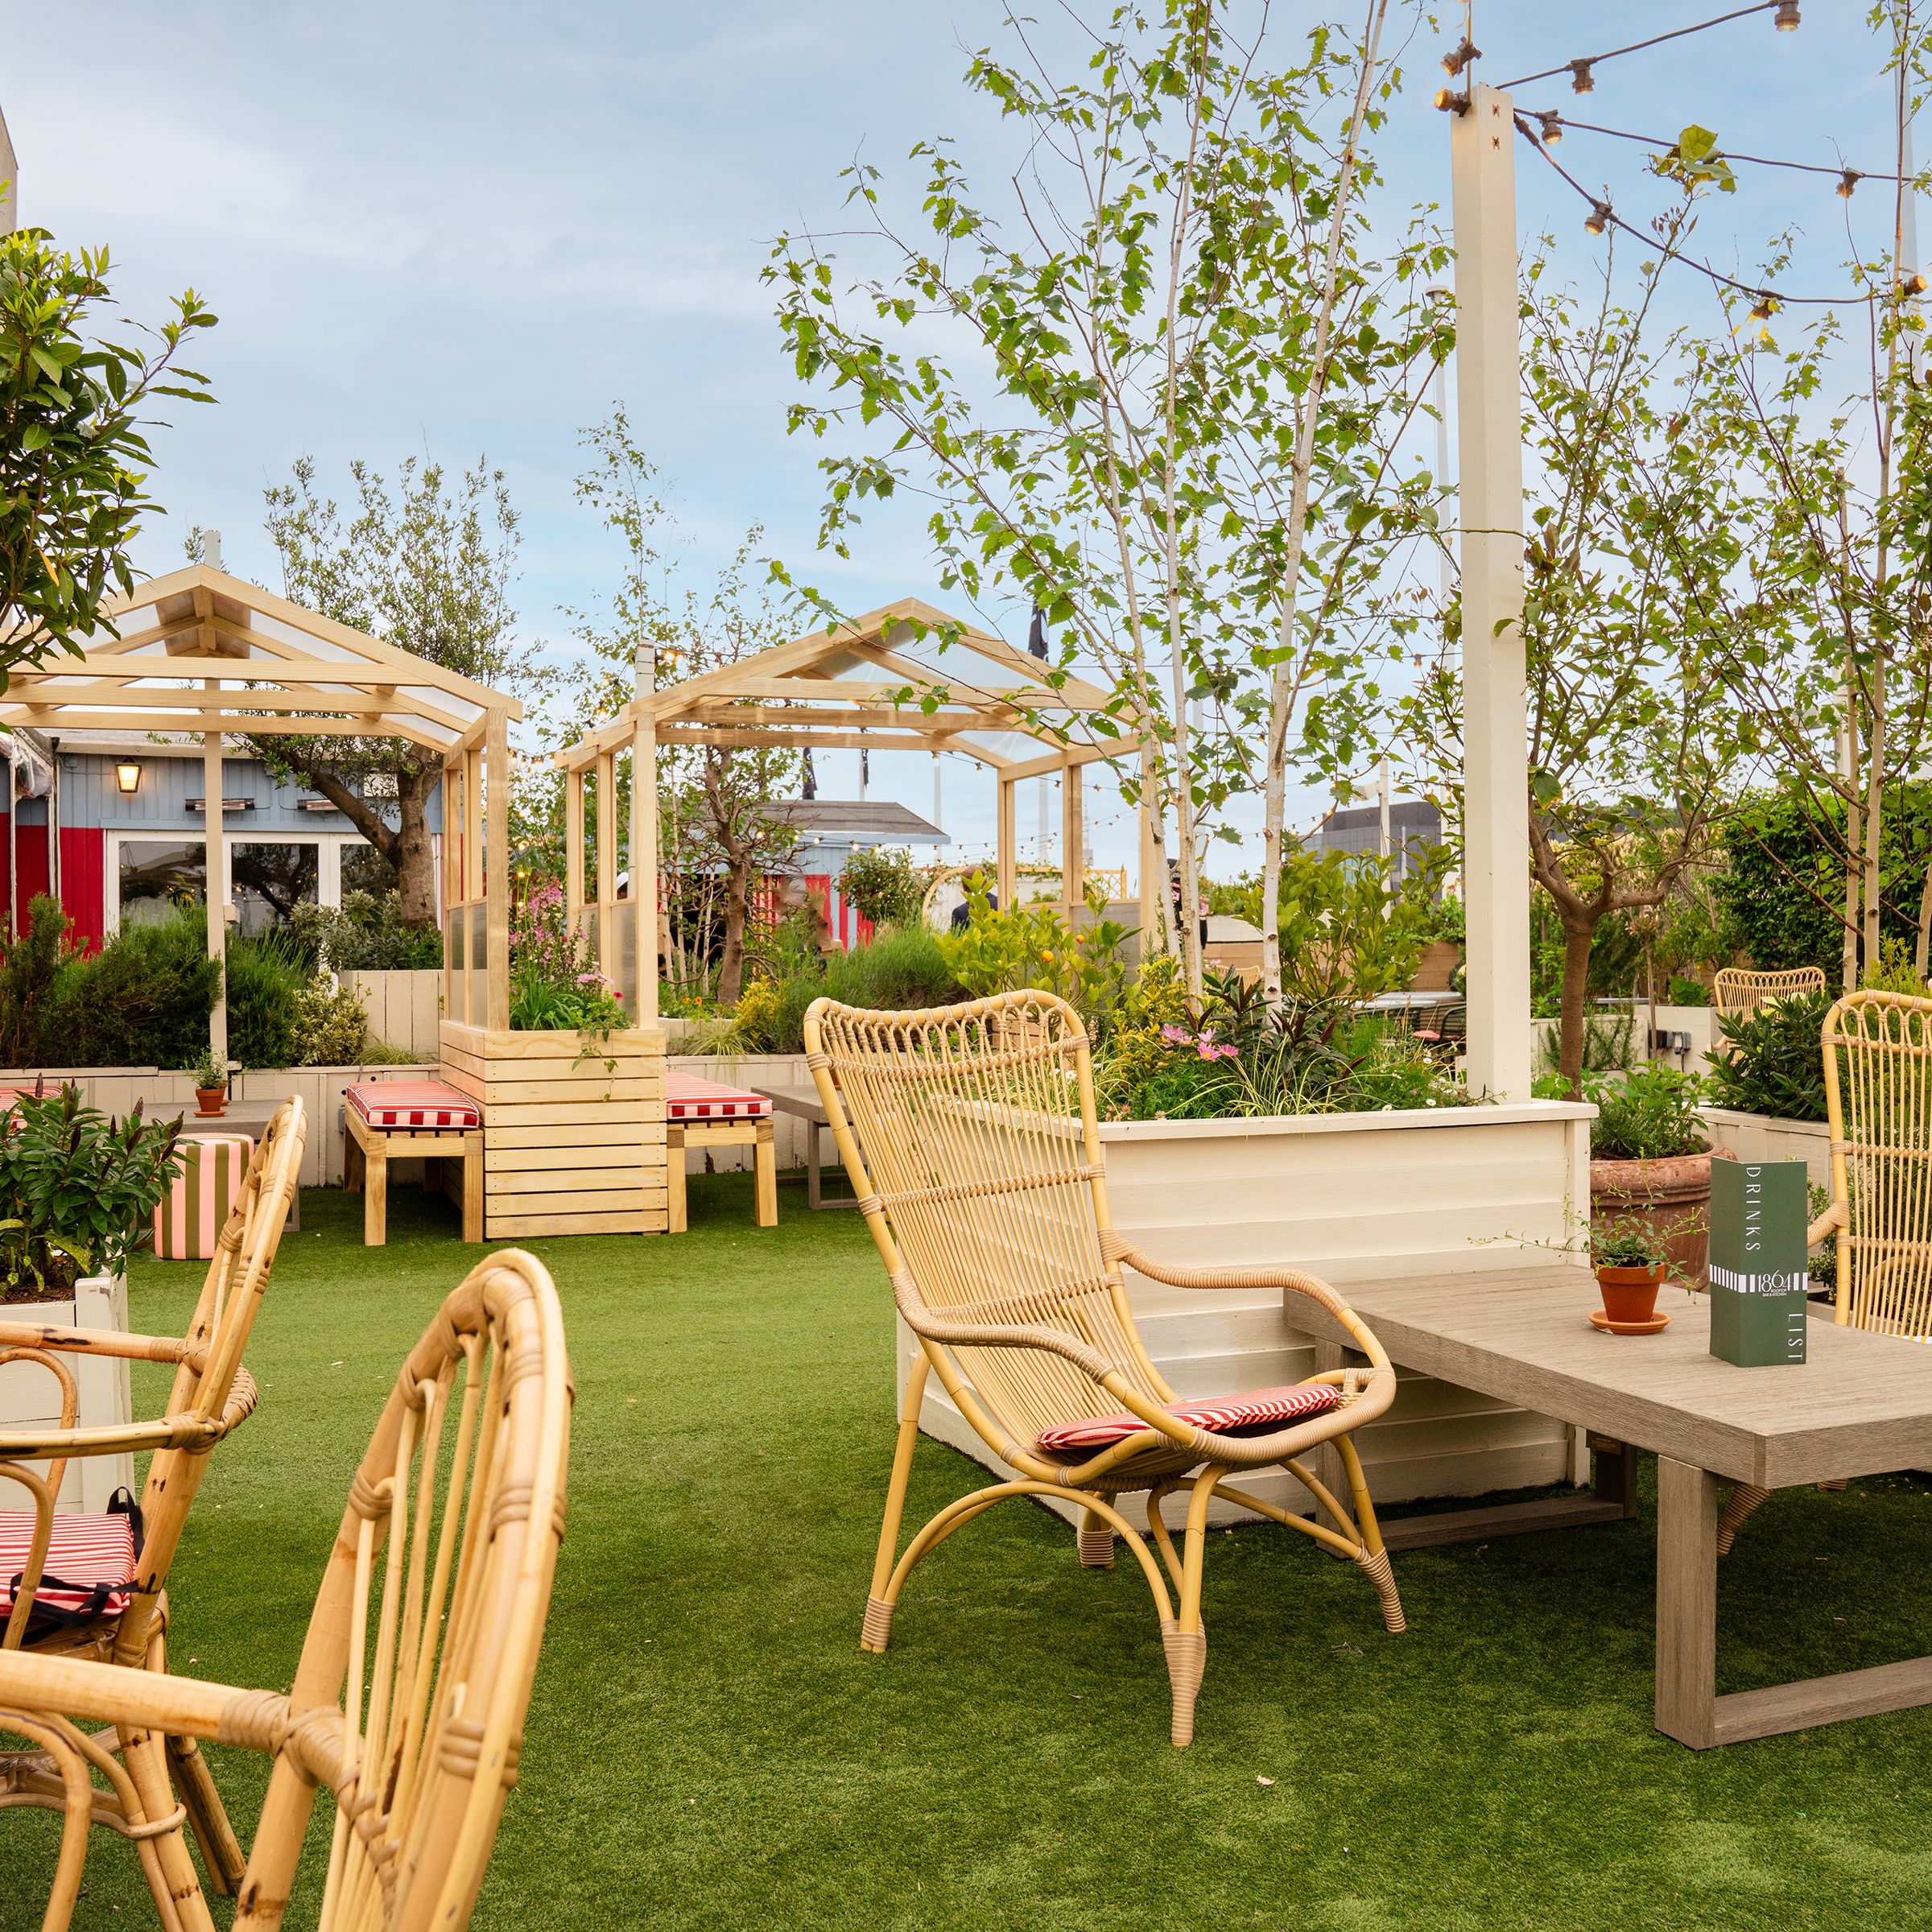 Image of our new Oxford Street roof garden bar